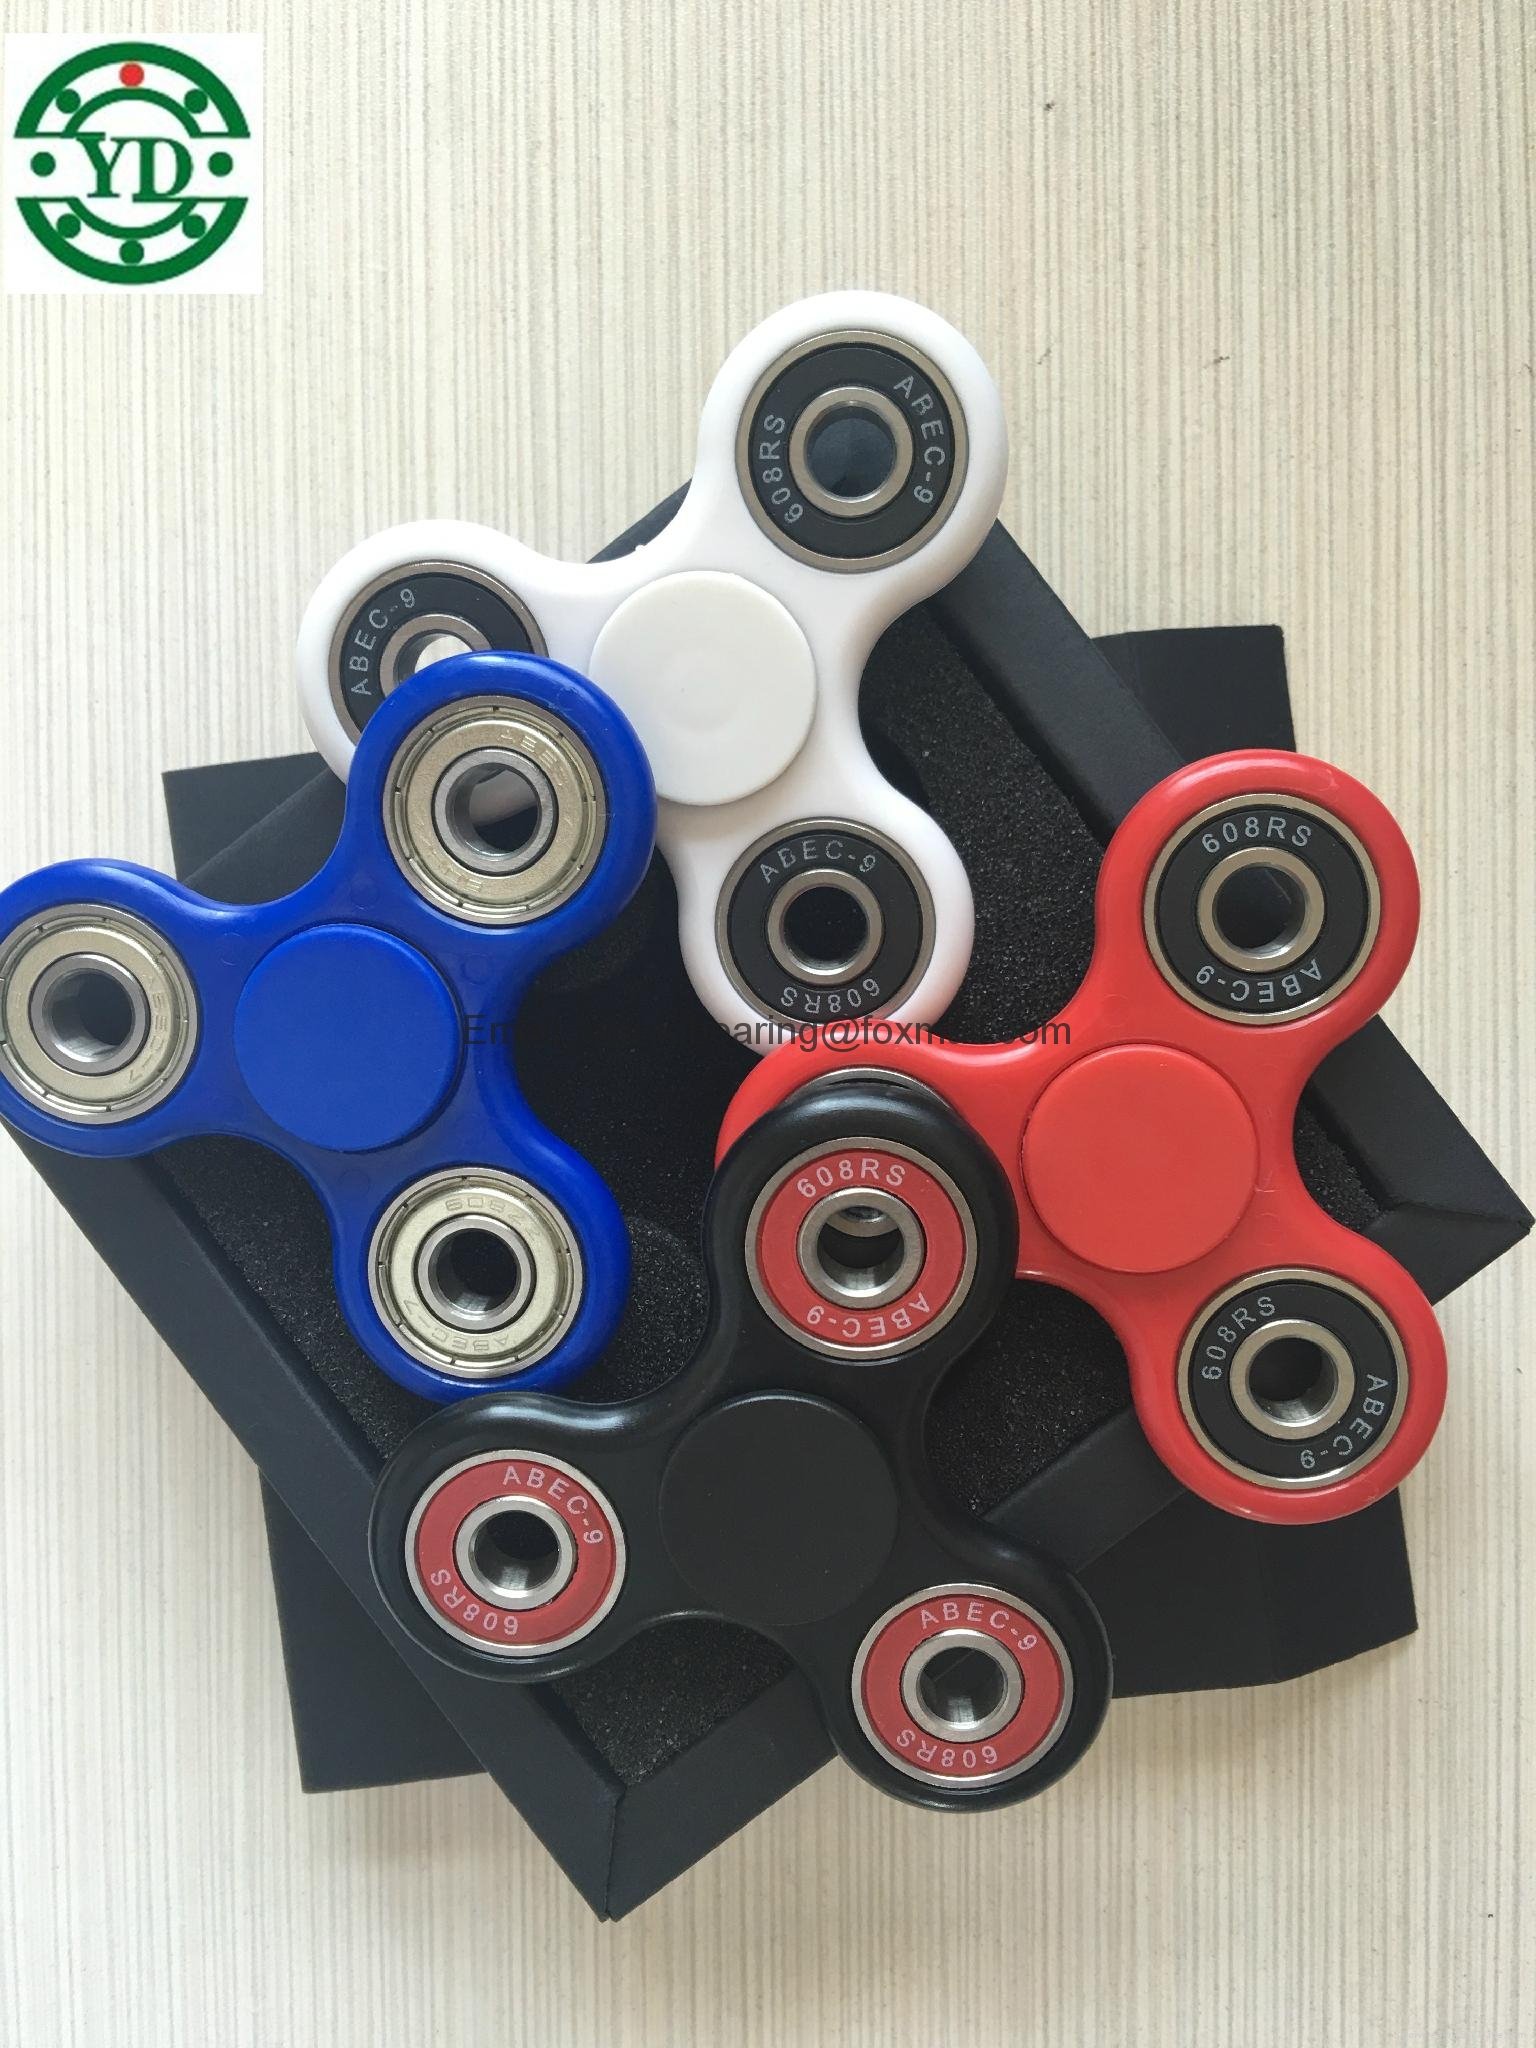 Hot sale ABS plastic hand spinner fidget spinner with 608 bearing 3